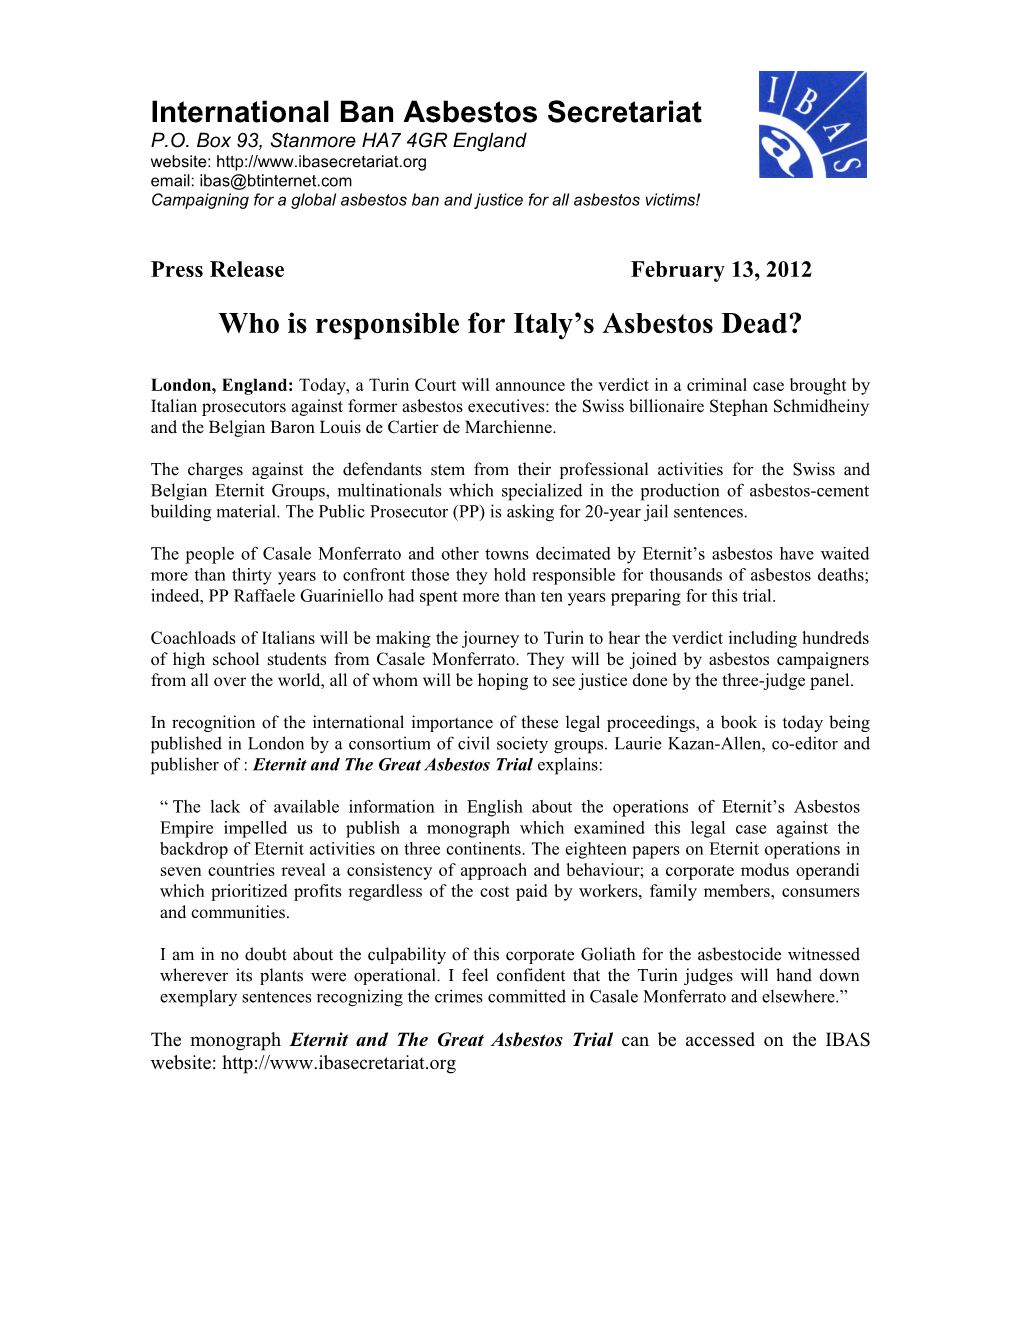 Who Is Responsible for Italy S Asbestos Dead?